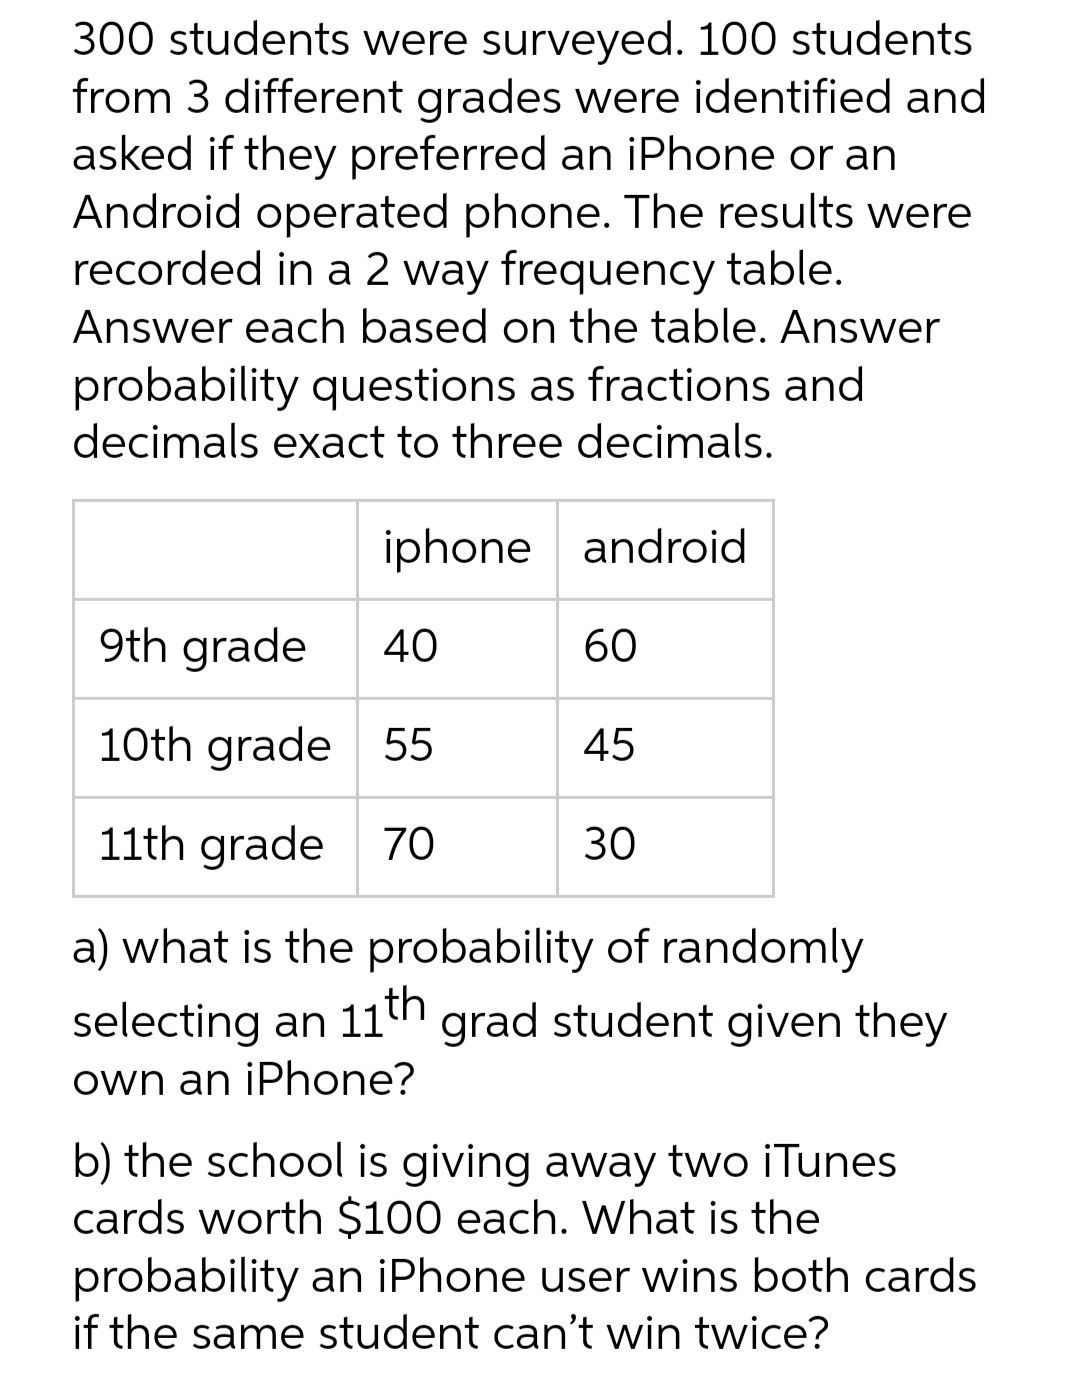 300 students were surveyed. 100 students
from 3 different grades were identified and
asked if they preferred an iPhone or an
Android operated phone. The results were
recorded in a 2 way frequency table.
Answer each based on the table. Answer
probability questions as fractions and
decimals exact to three decimals.
iphone android
9th grade
40
60
10th grade 55
45
11th grade 70
30
a) what is the probability of randomly
selecting an 11th grad student given they
own an iPhone?
b) the school is giving away two iTunes
cards worth $100 each. What is the
probability an iPhone user wins both cards
if the same student can't win twice?
